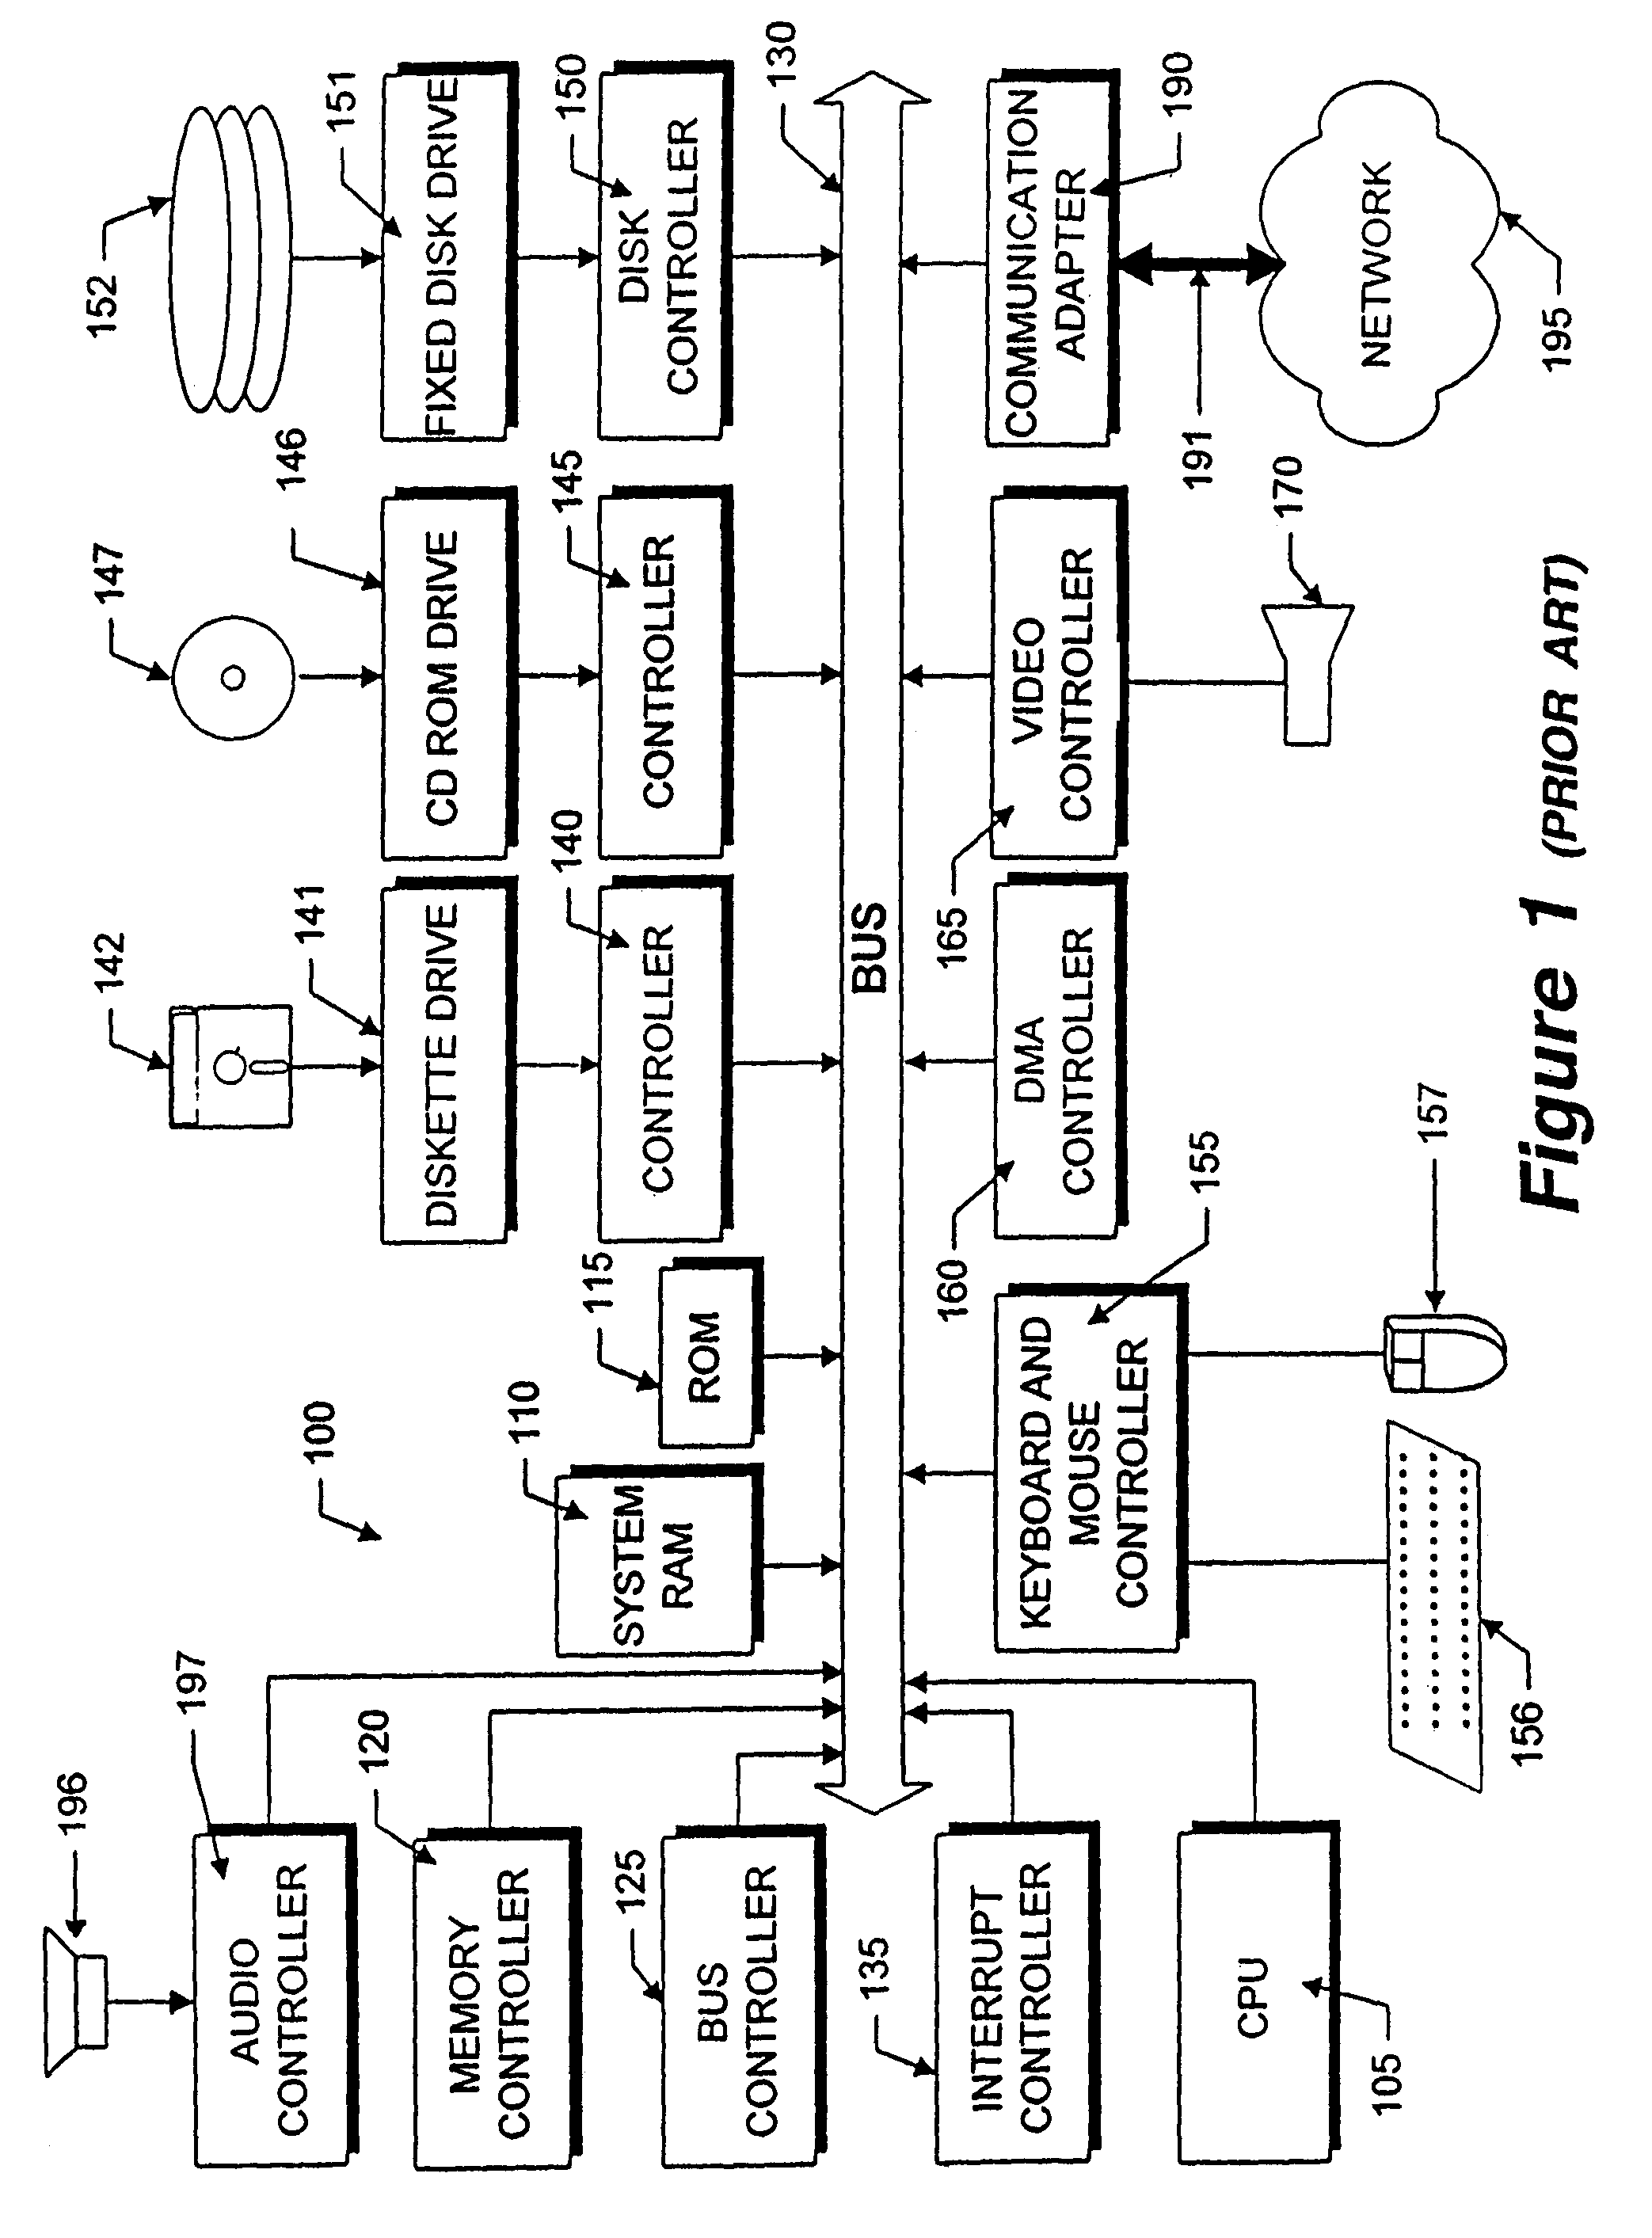 Method and apparatus for creation, personalization, and fulfillment of greeting cards with gift cards